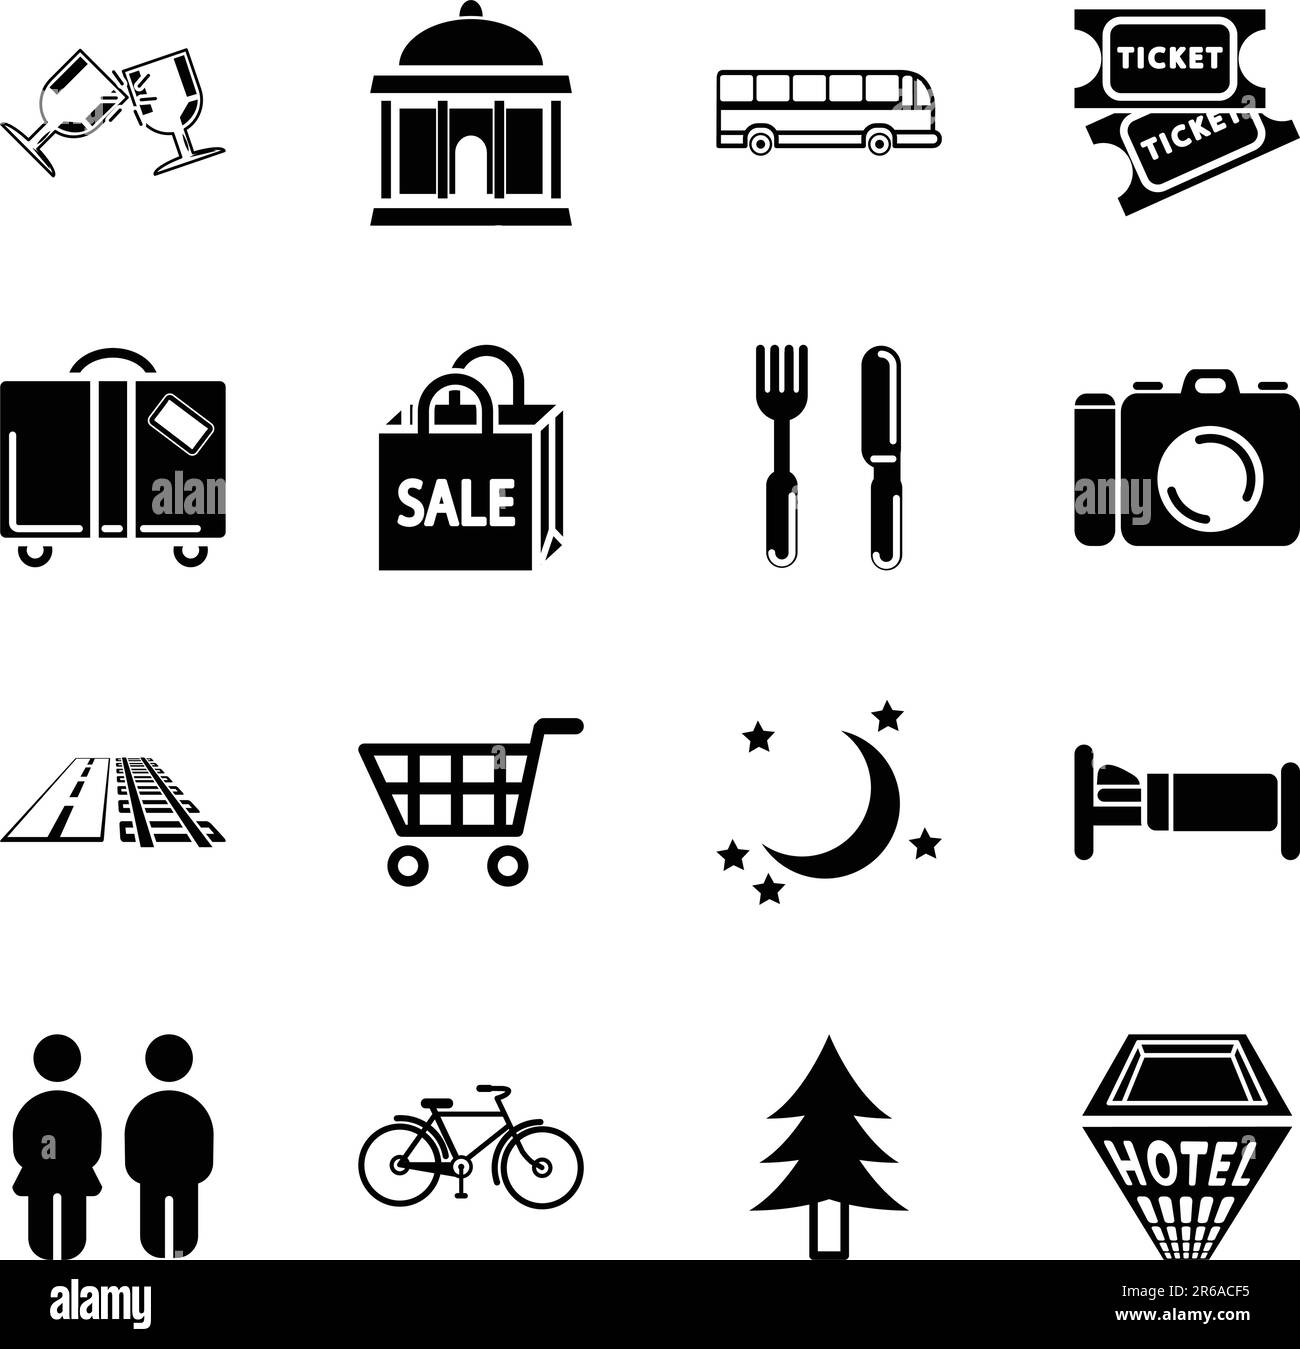 Icon set relating to city or location information for tourist web sites or maps etc. Stock Vector